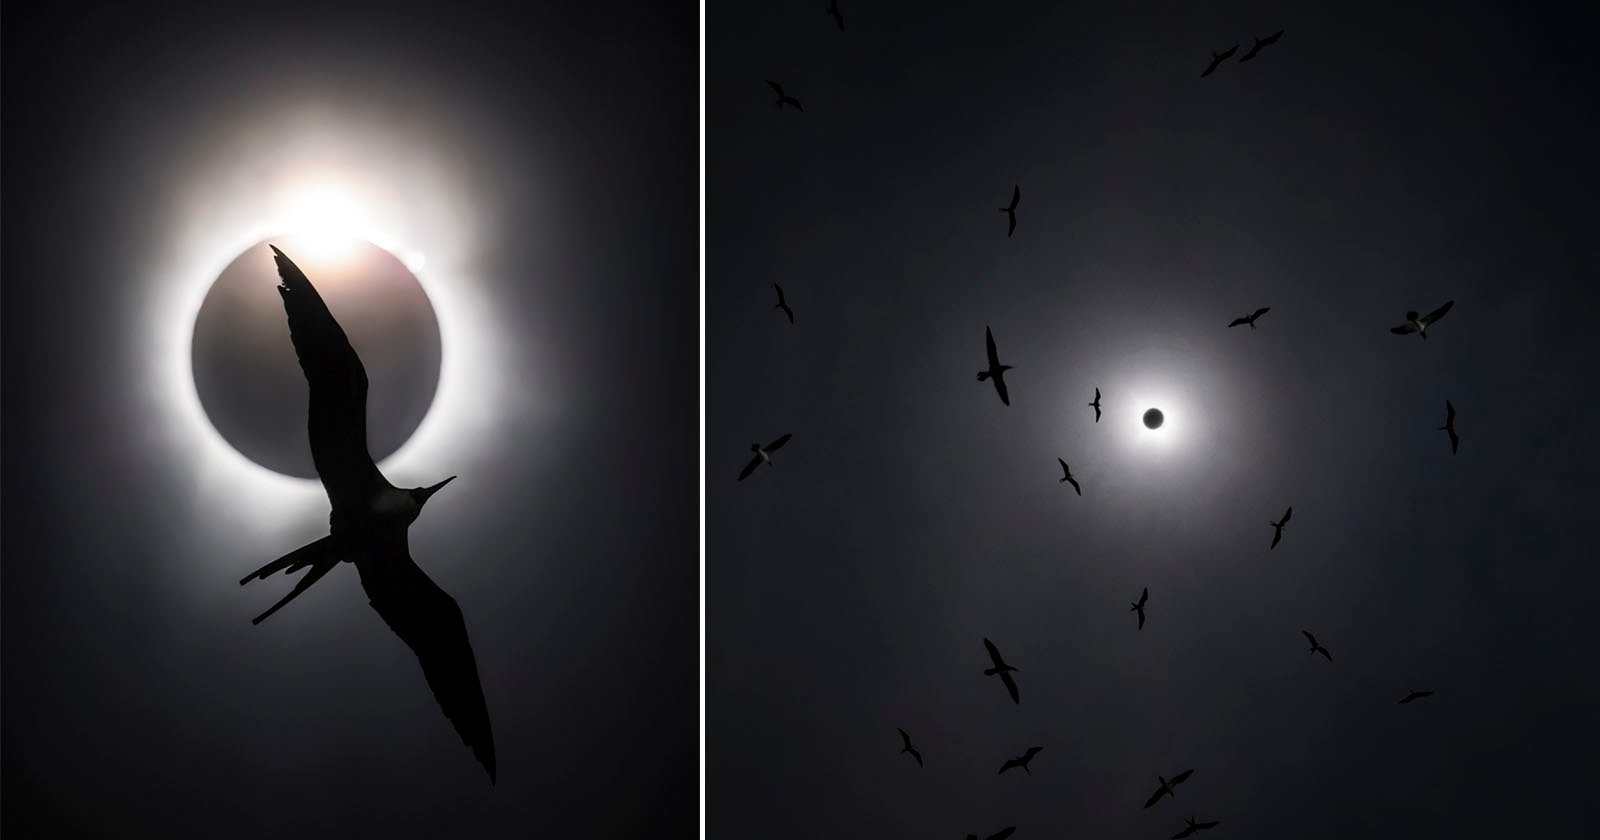  how photographer captured his spectacular dream eclipse photo 